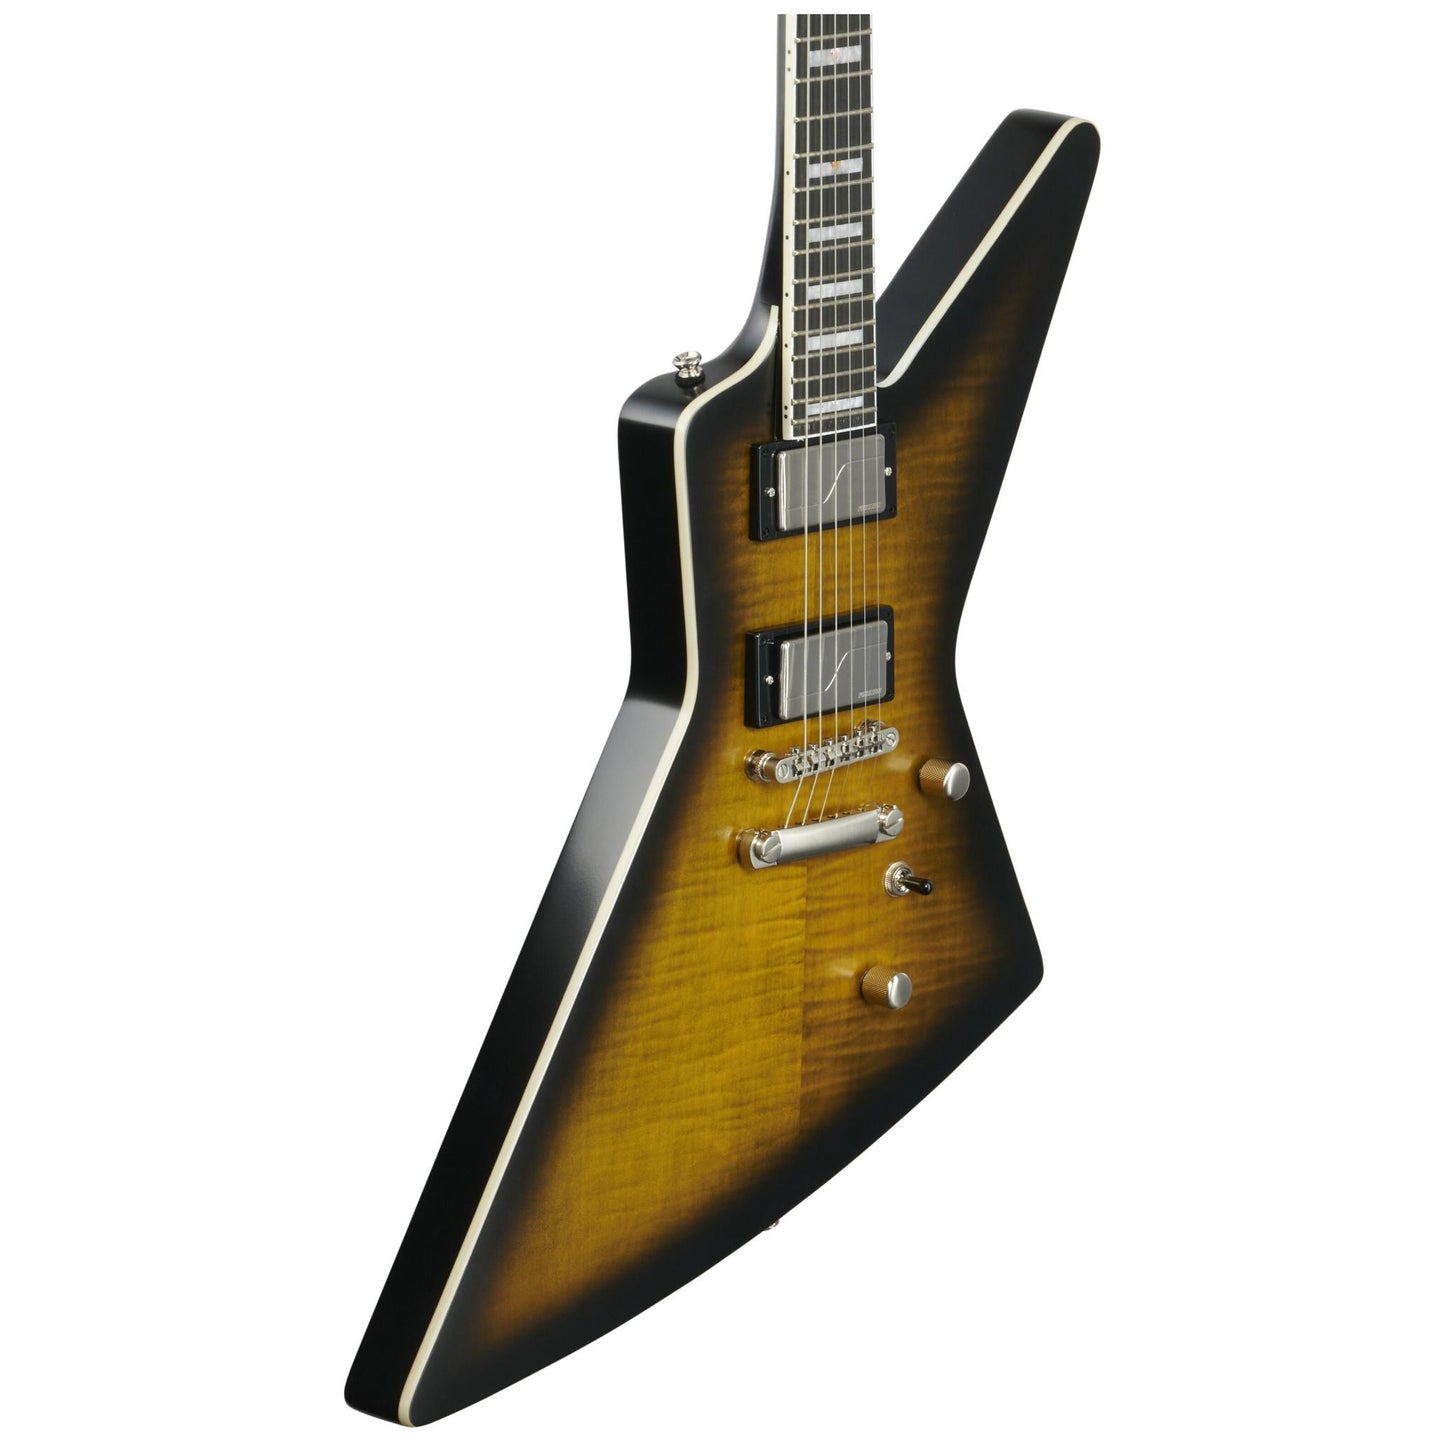 Epiphone Extura Prophecy Electric Guitar, Yellow Tiger Aged Gloss